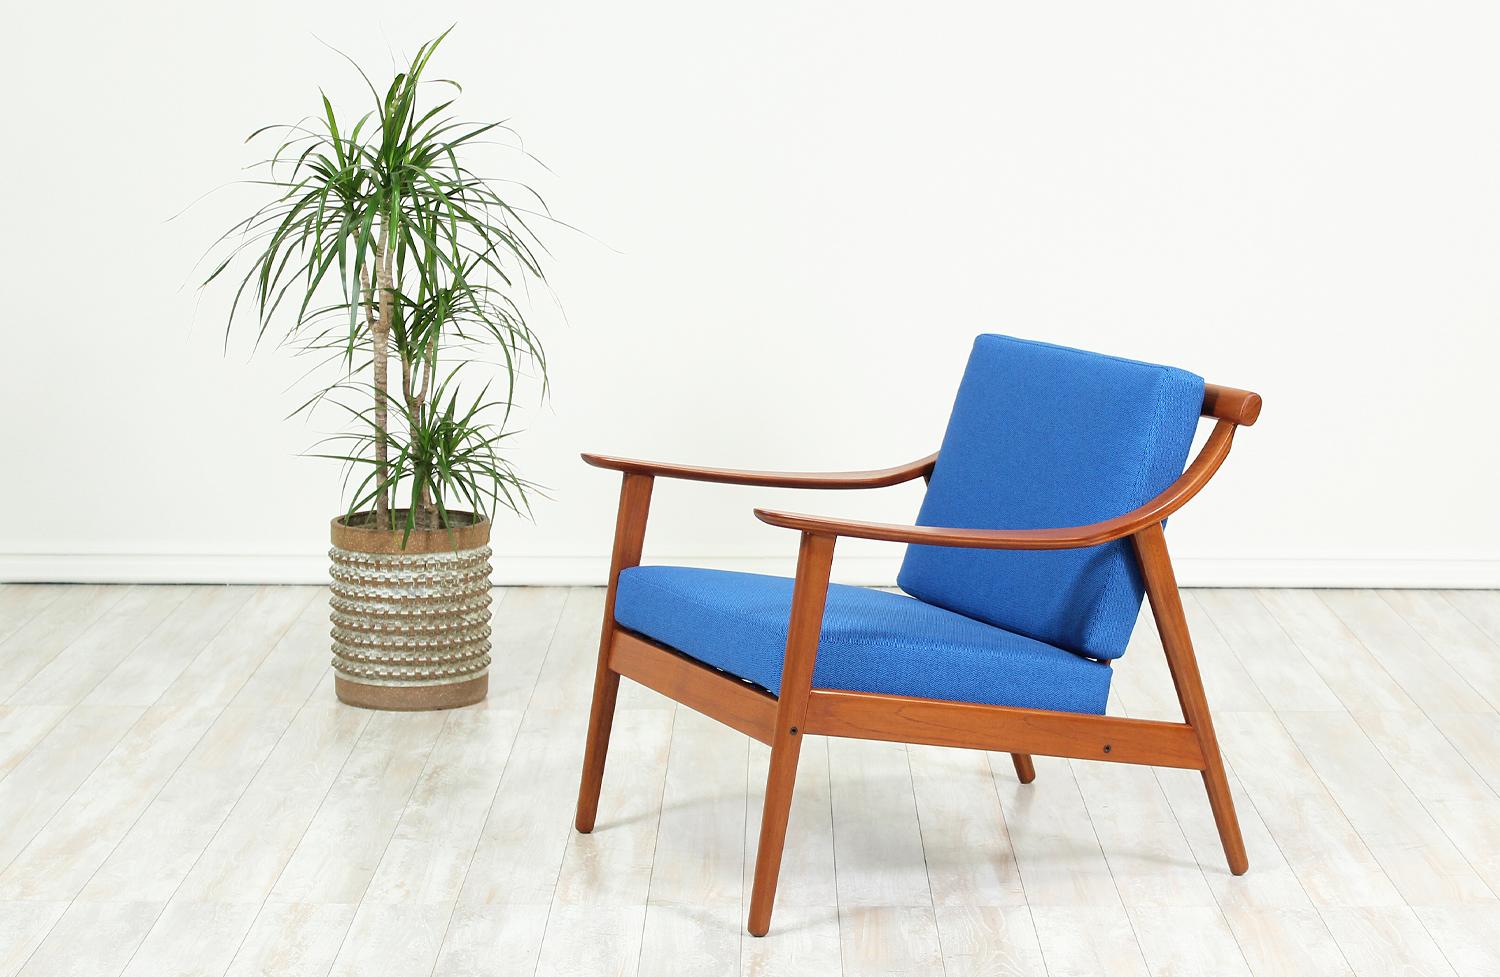 Beautifully crafted lounge chair designed by Arne Hovmand-Olsen for Mogens Kold in Denmark, circa 1950s. This Danish Modern chair features a solid teak wood frame with a slatted back and swooping bentwood armrests. The back and seat cushions are new